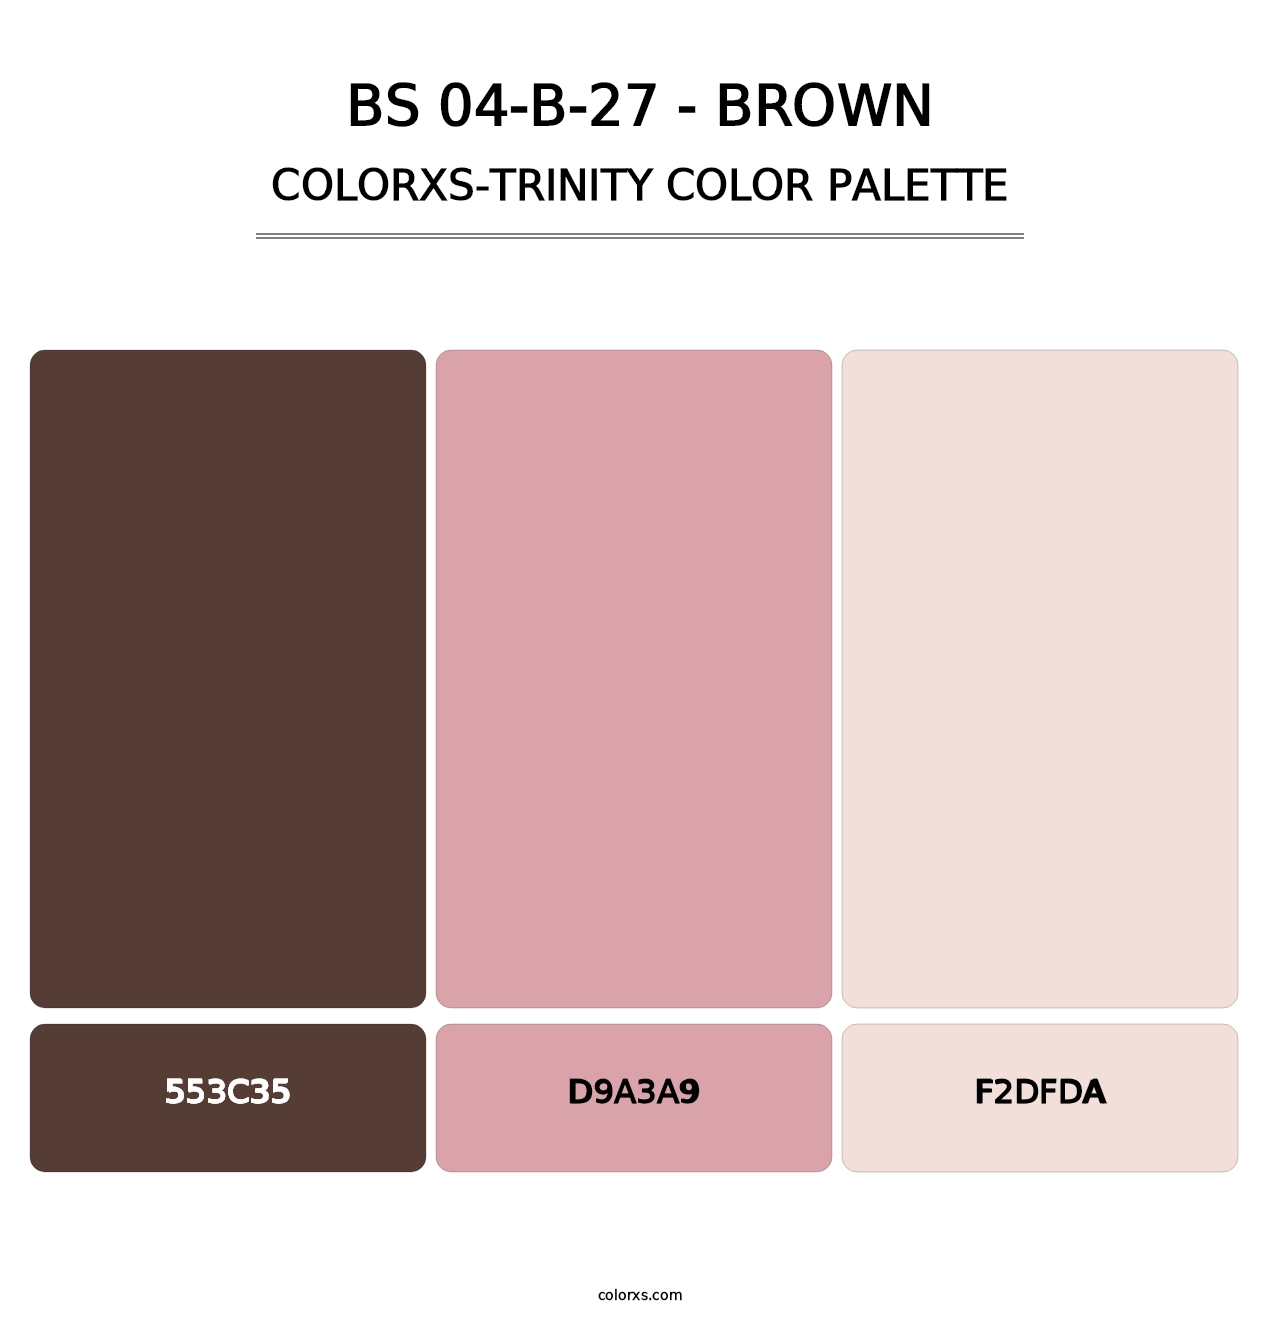 BS 04-B-27 - Brown - Colorxs Trinity Palette